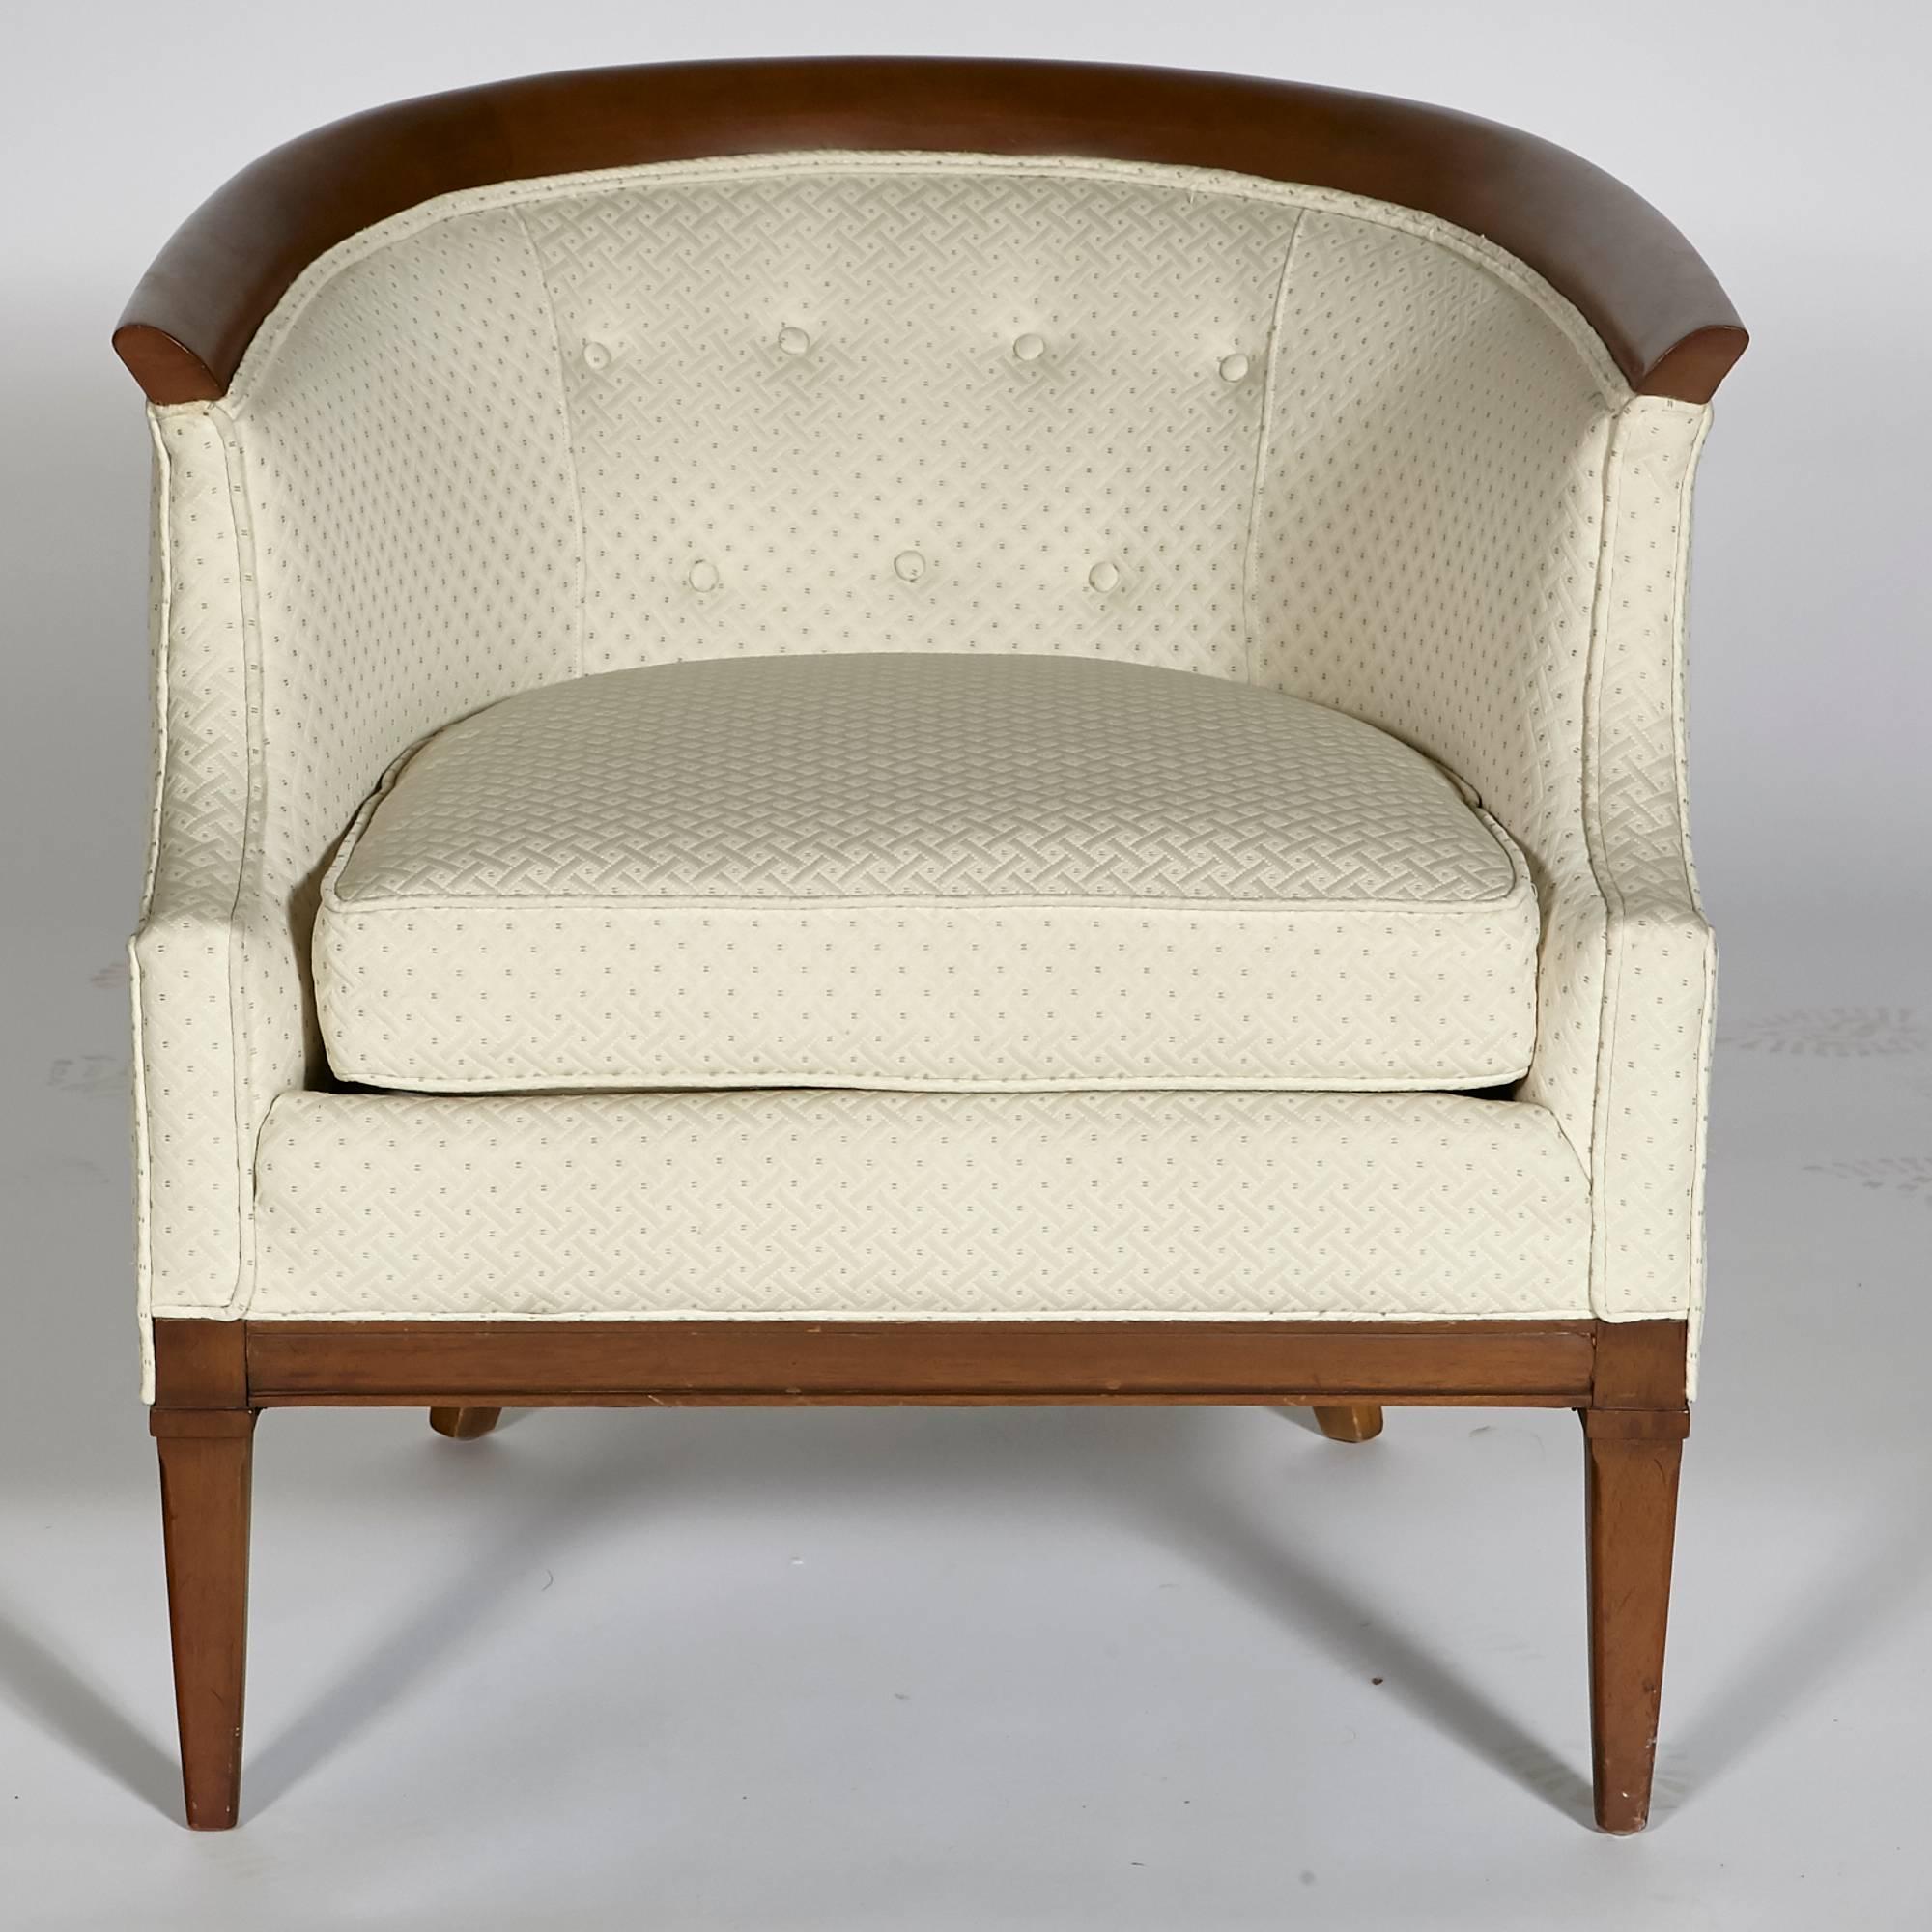 Walnut Sculpted Lounge Chair by Erwin-Lambeth In Good Condition For Sale In Amherst, NH